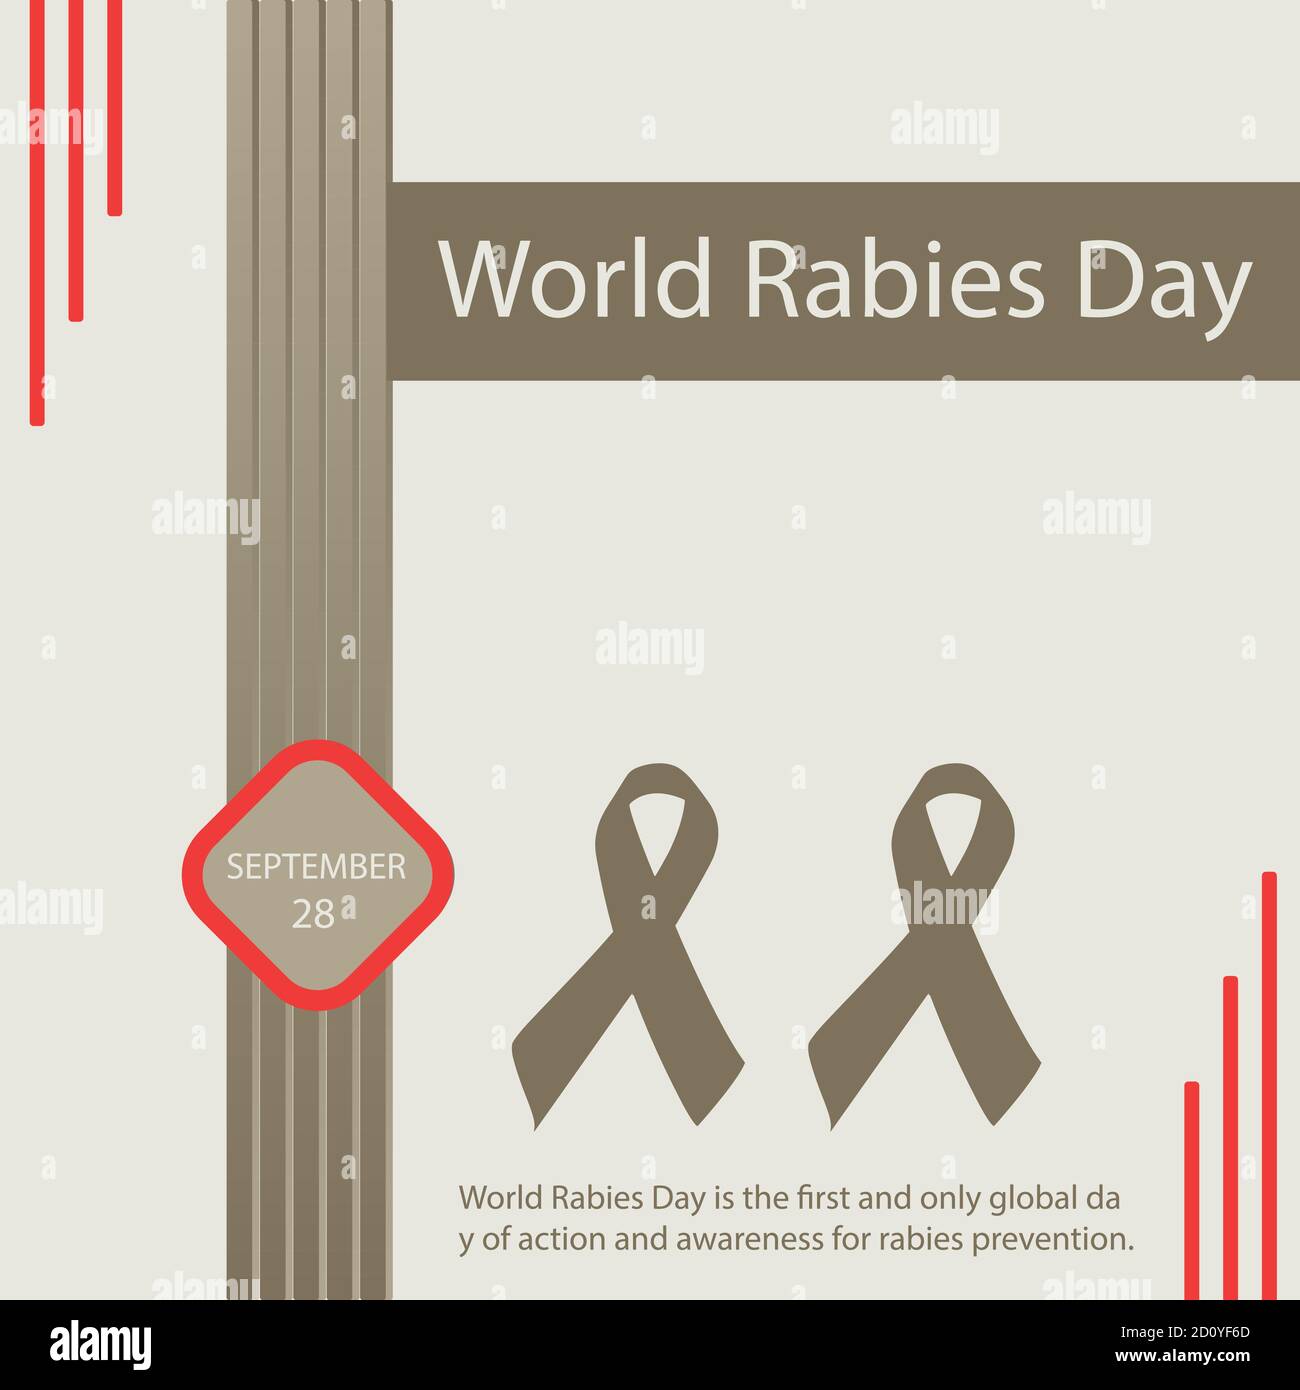 World Rabies Day is the first and only global day of action and awareness for rabies prevention. Stock Vector